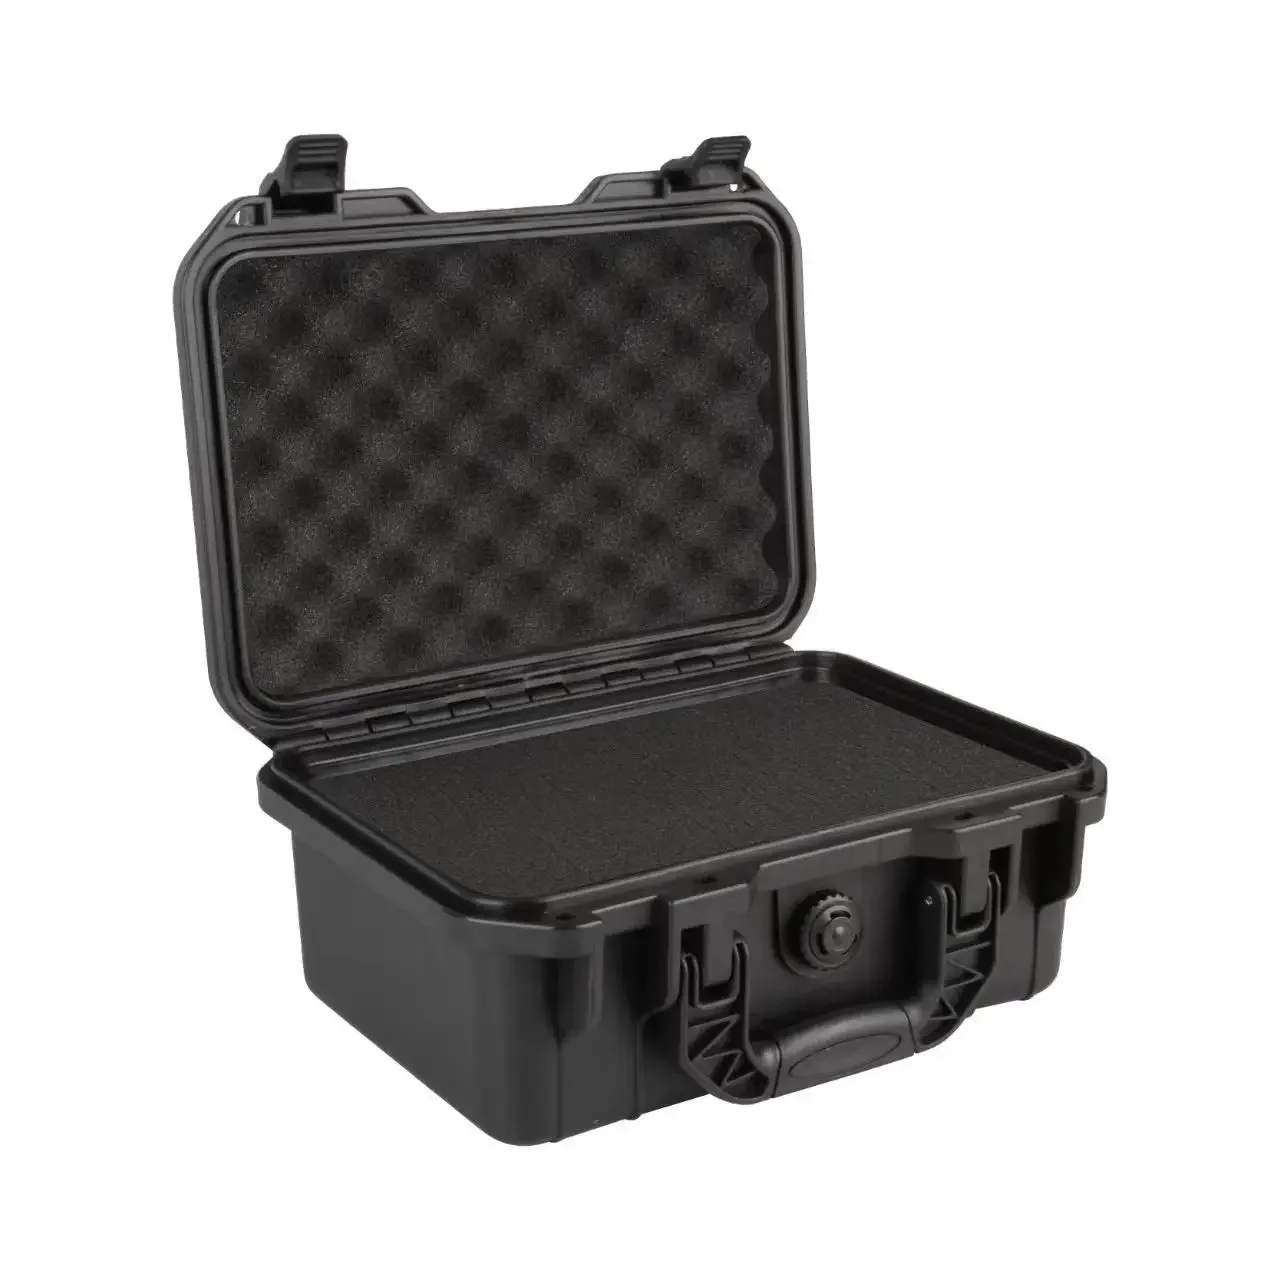 

Waterproof Plastic Protective Safety Equipment Case Hard Carry Tool Box Shockproof Storage Box with Sponge for Tools Camera